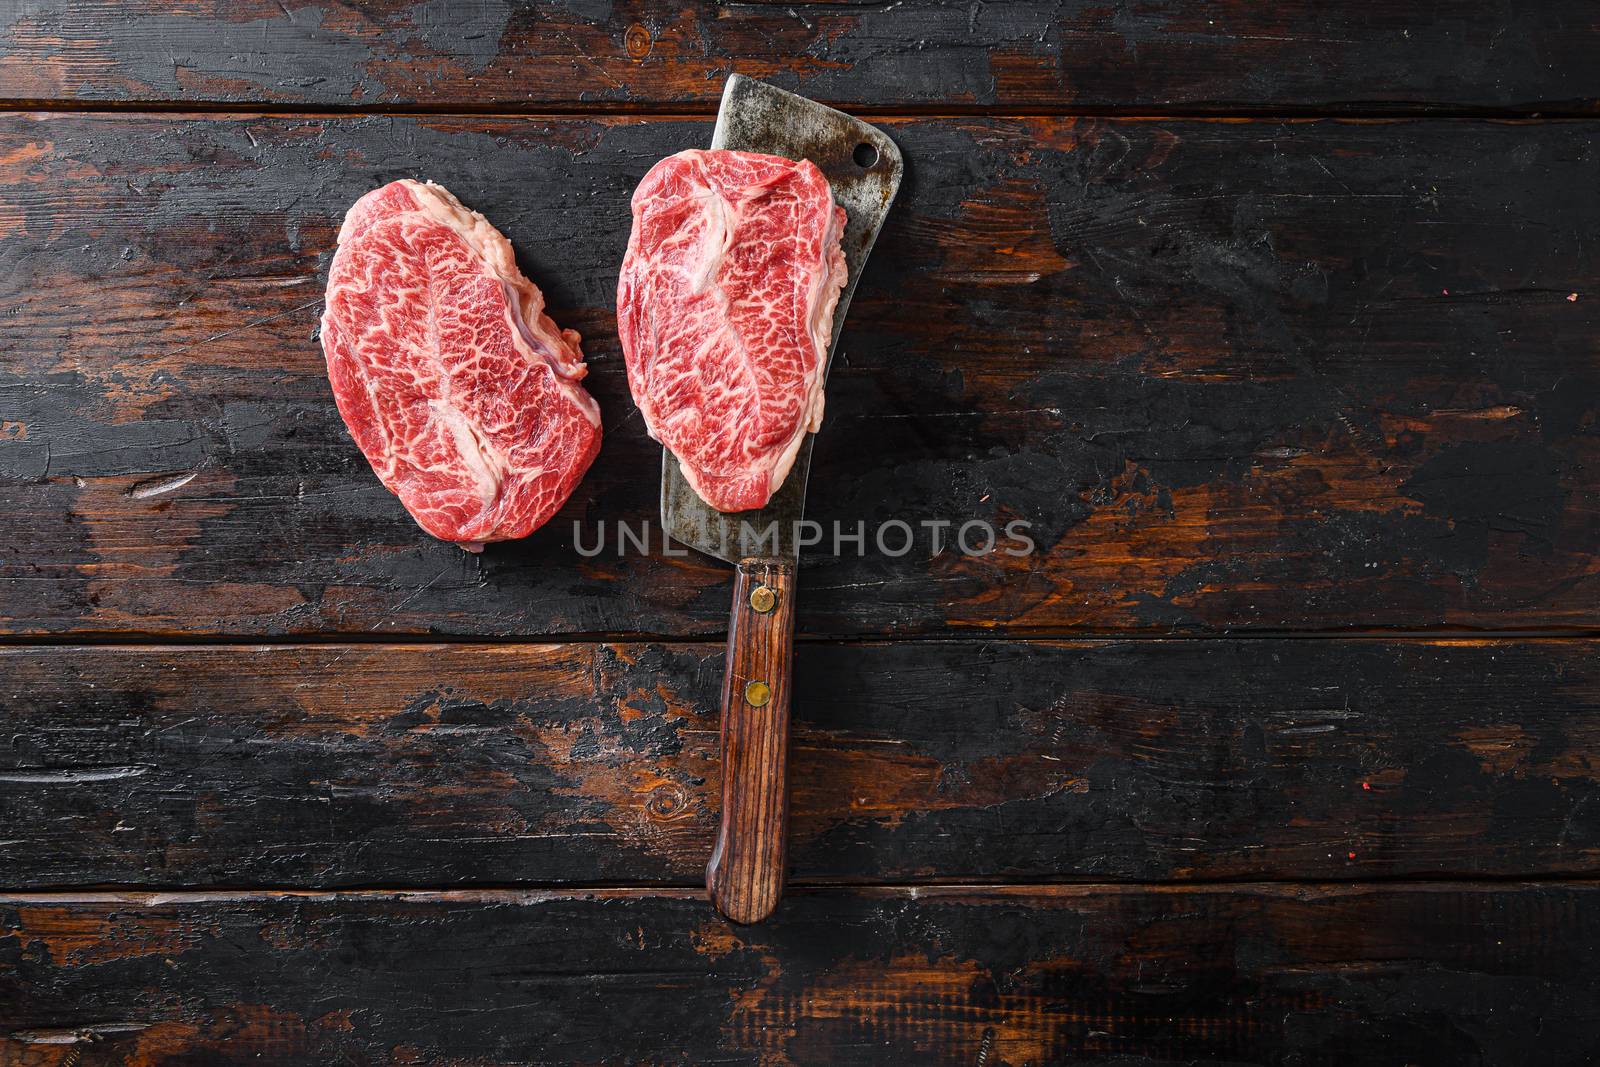 Flat iron steak, raw meat, marbled beef Top blade chuck cut on metal butcher cleaver knife top view space for text by Ilianesolenyi